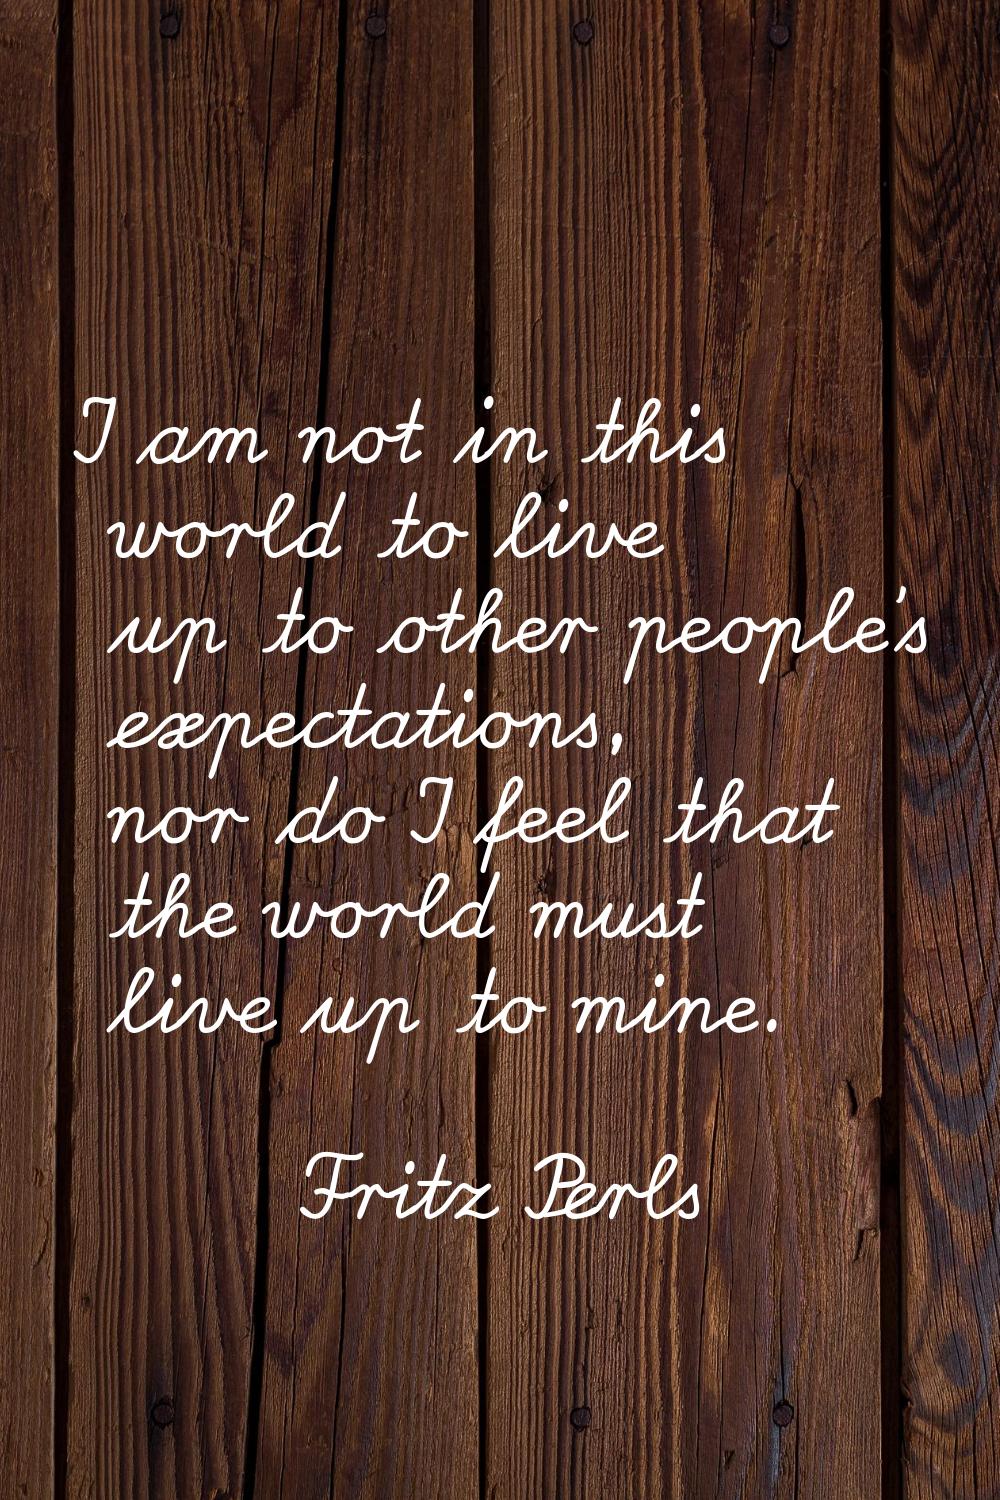 I am not in this world to live up to other people's expectations, nor do I feel that the world must